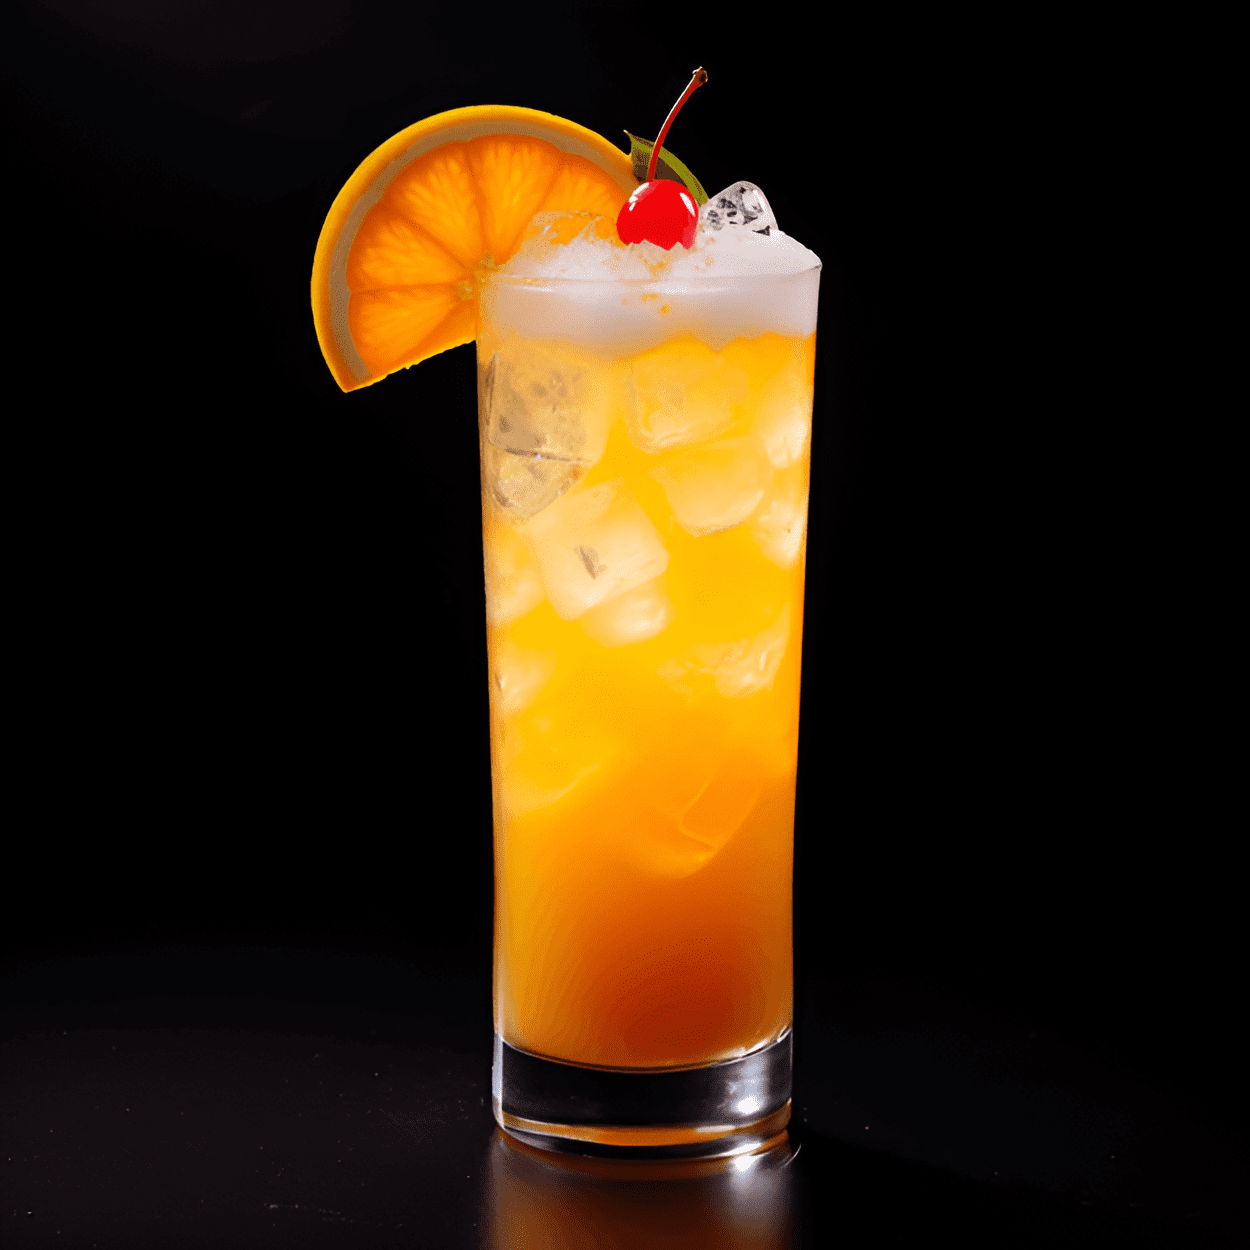 007 Cocktail Recipe - The 007 cocktail is a light and refreshing drink with a citrusy tang. The sweetness of the orange juice and 7 Up balance out the sharpness of the vodka, resulting in a smooth, easy-to-drink cocktail.